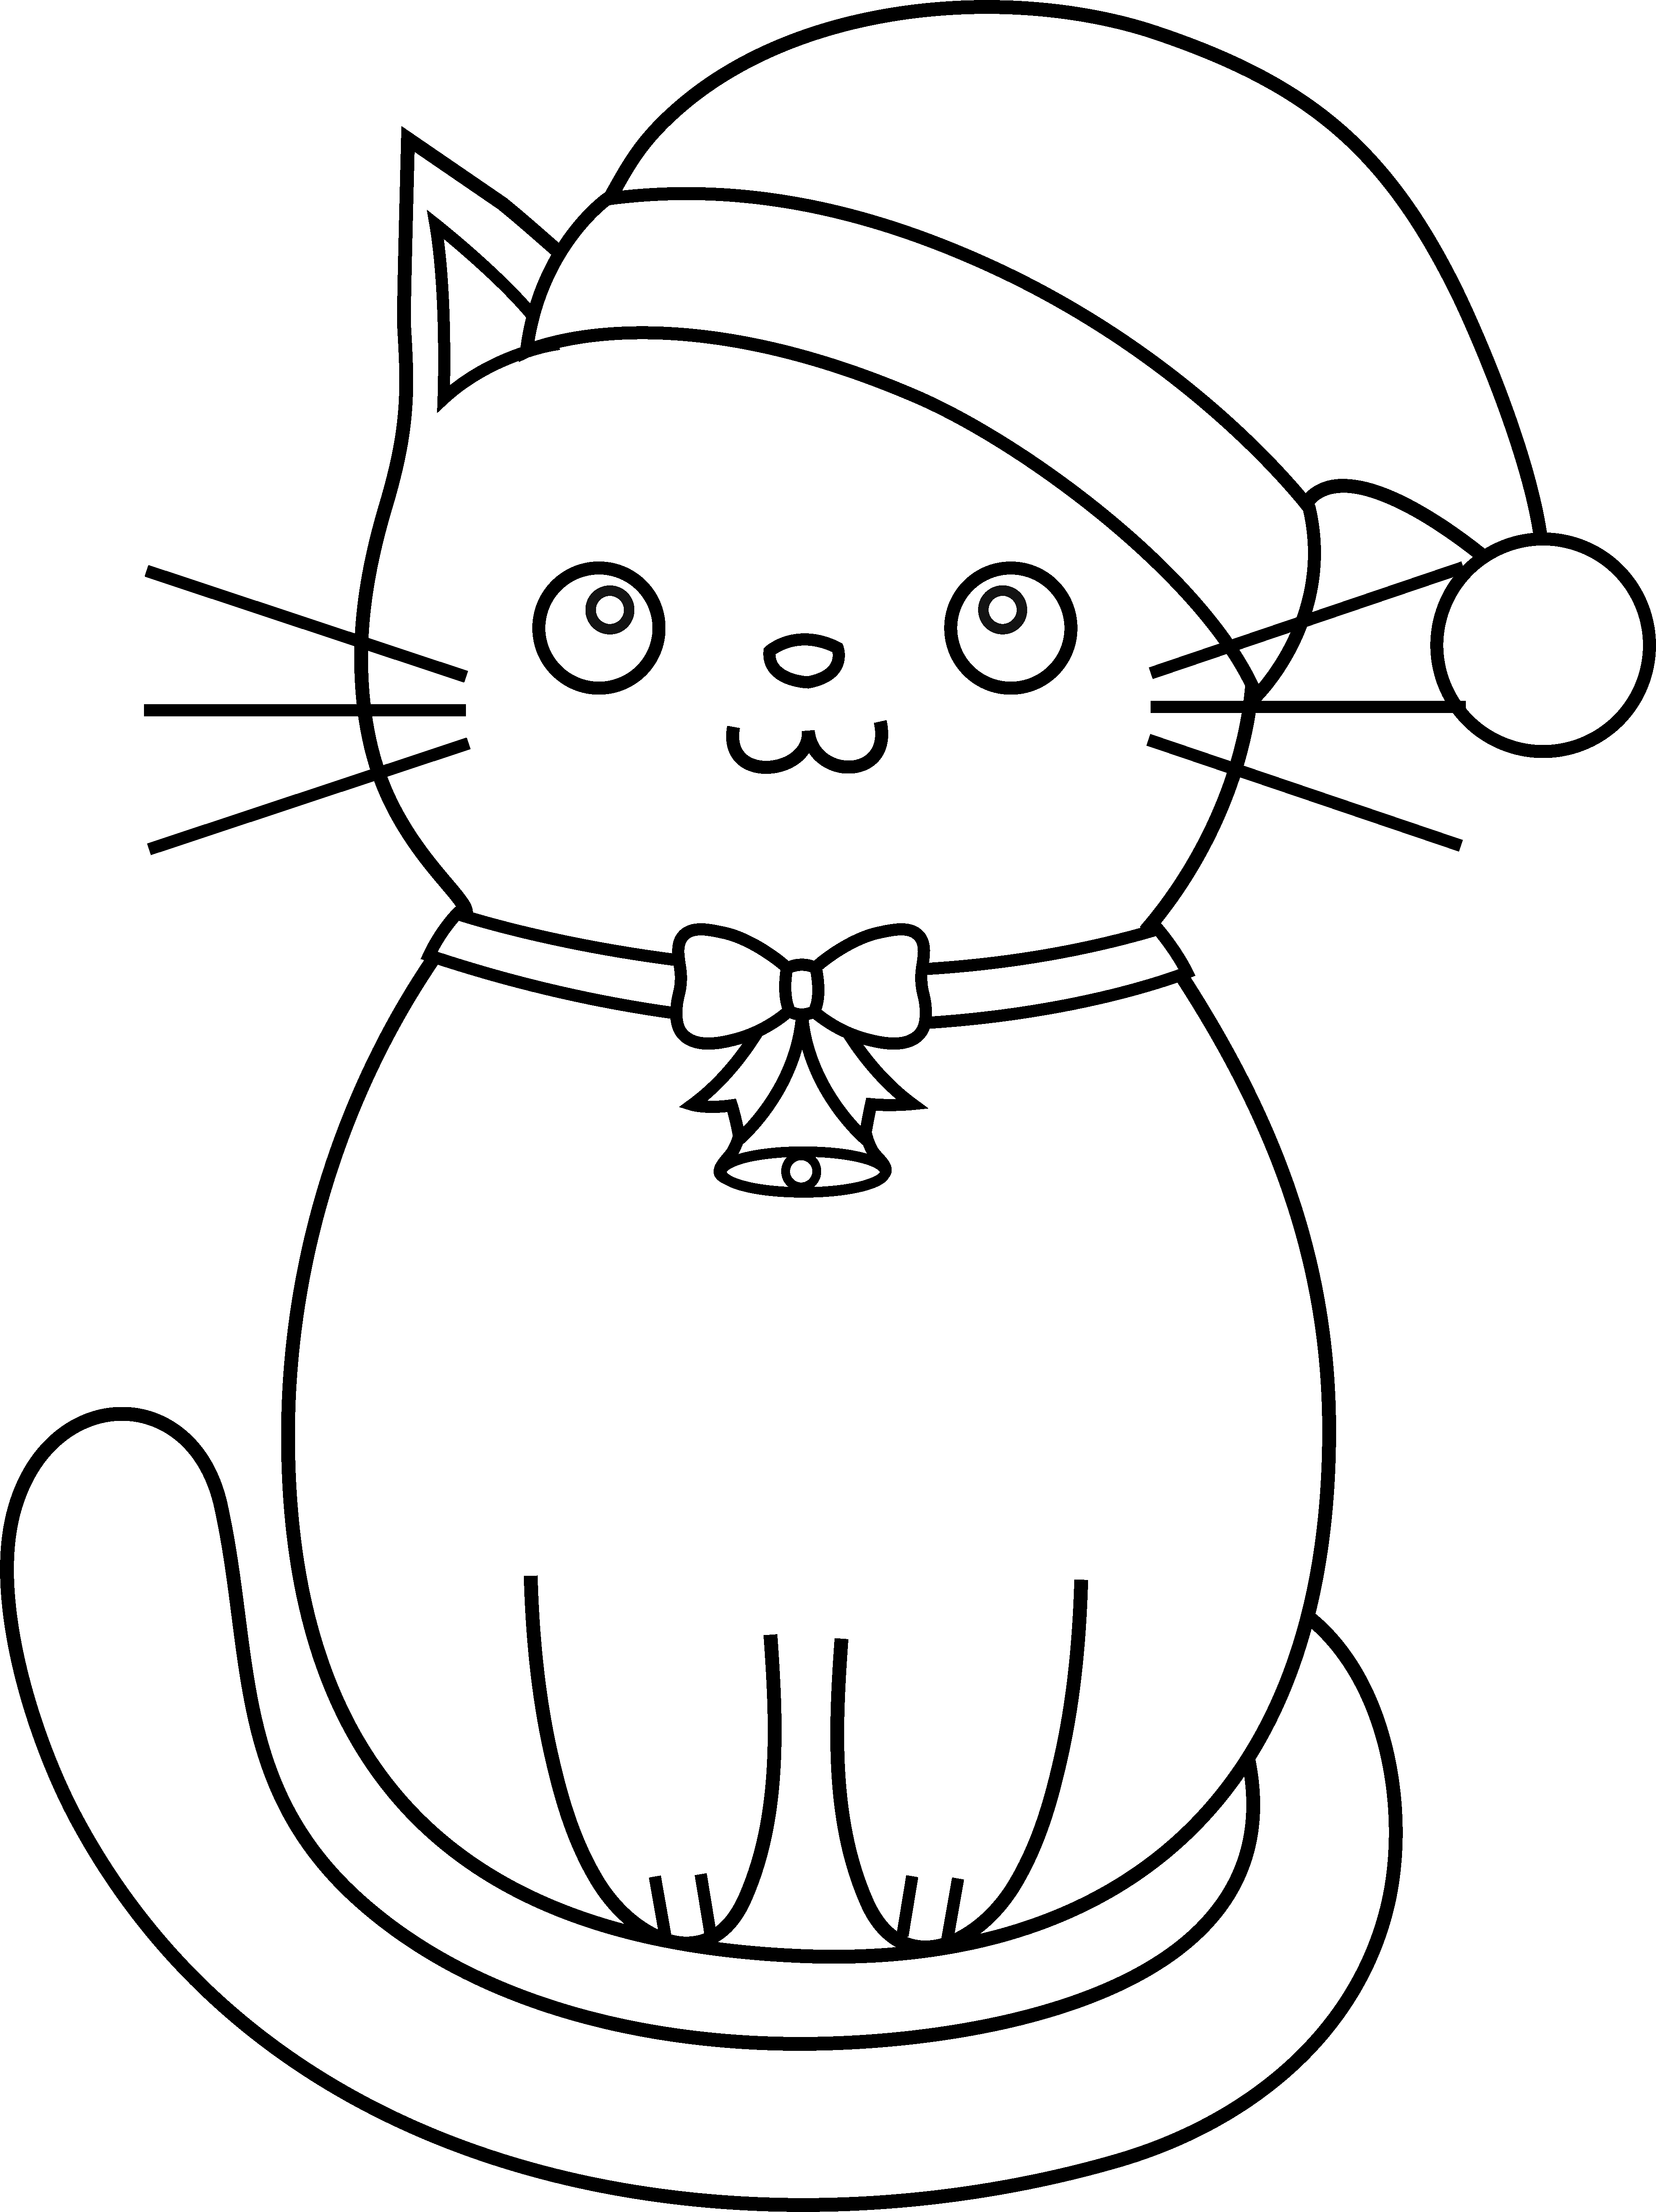 free-printable-kitten-coloring-pages-free-templates-printable